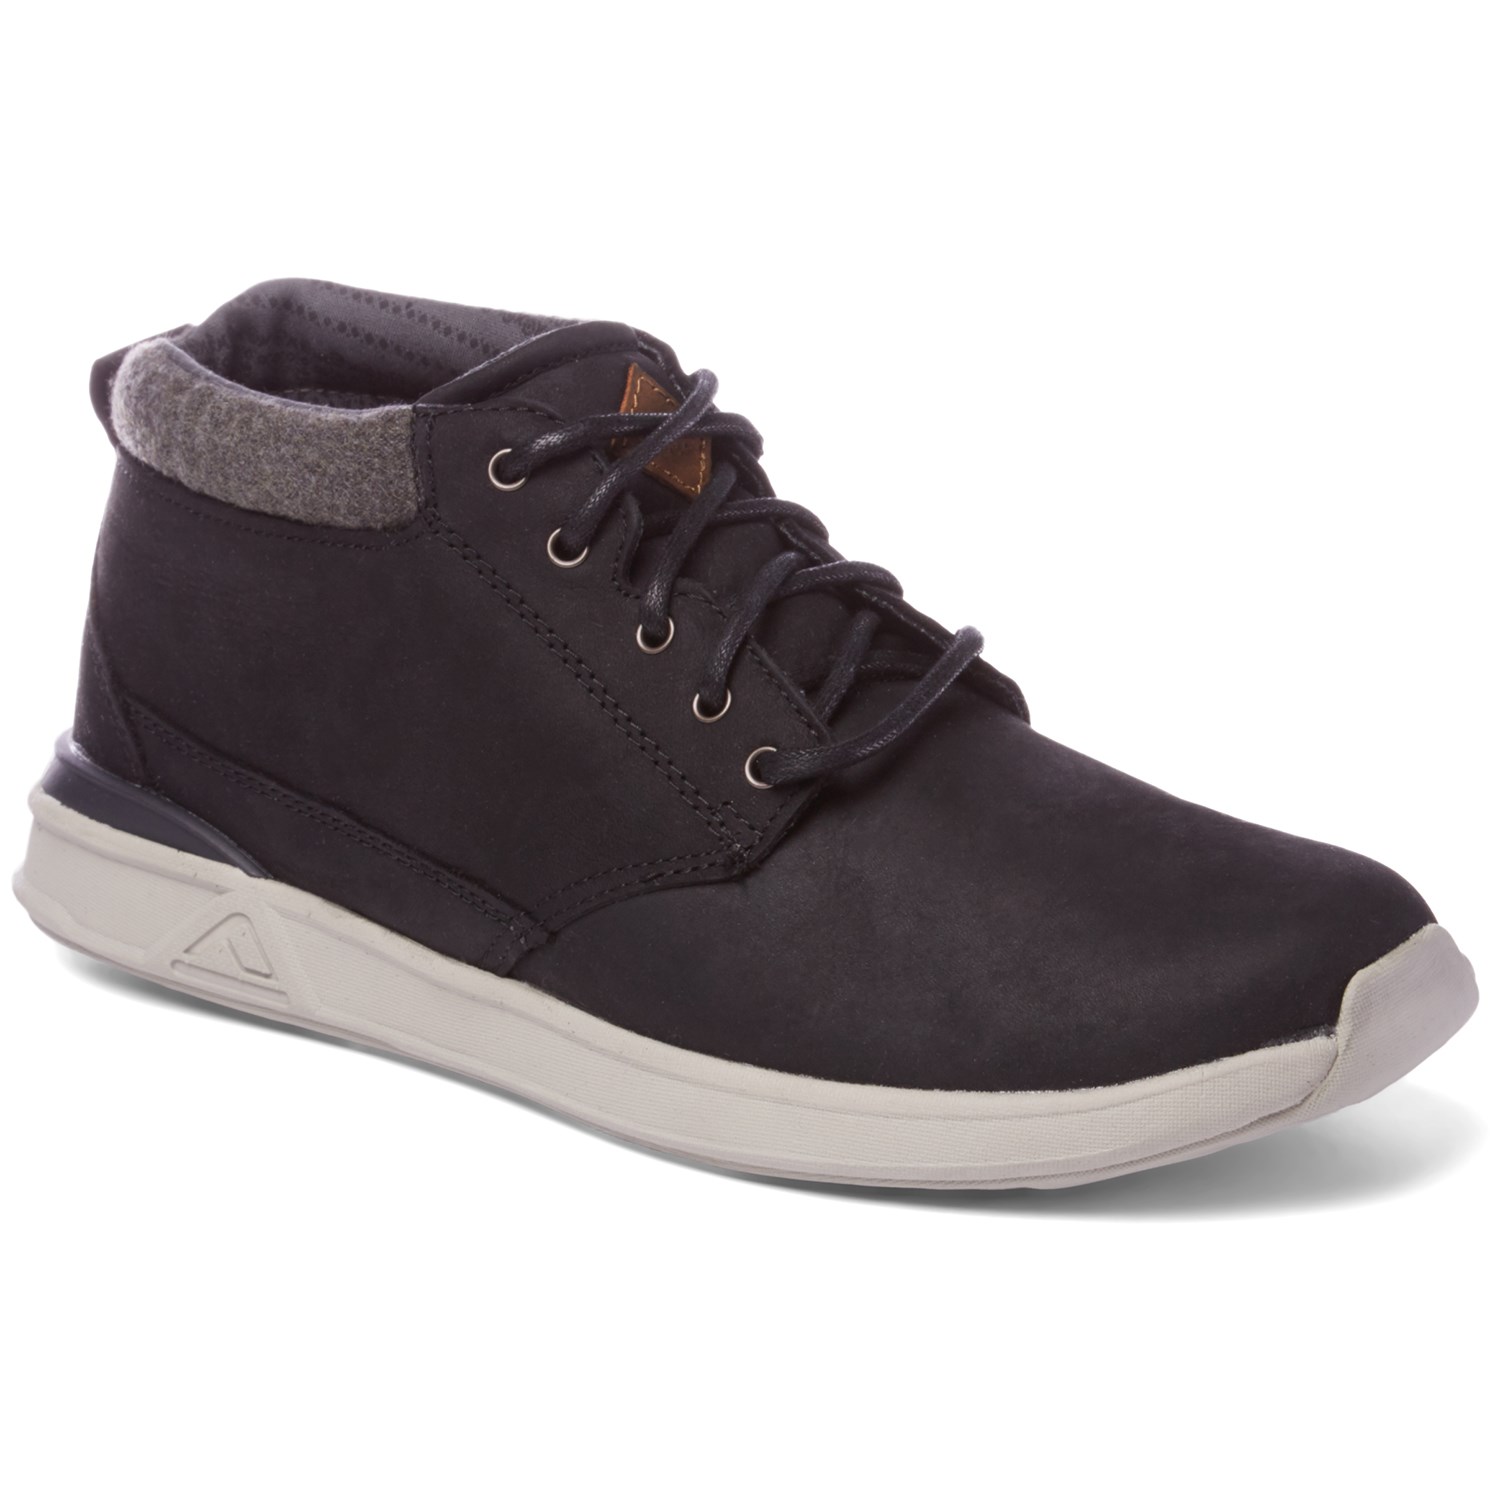 Reef Rover Mid Full Grain Leather Shoes 